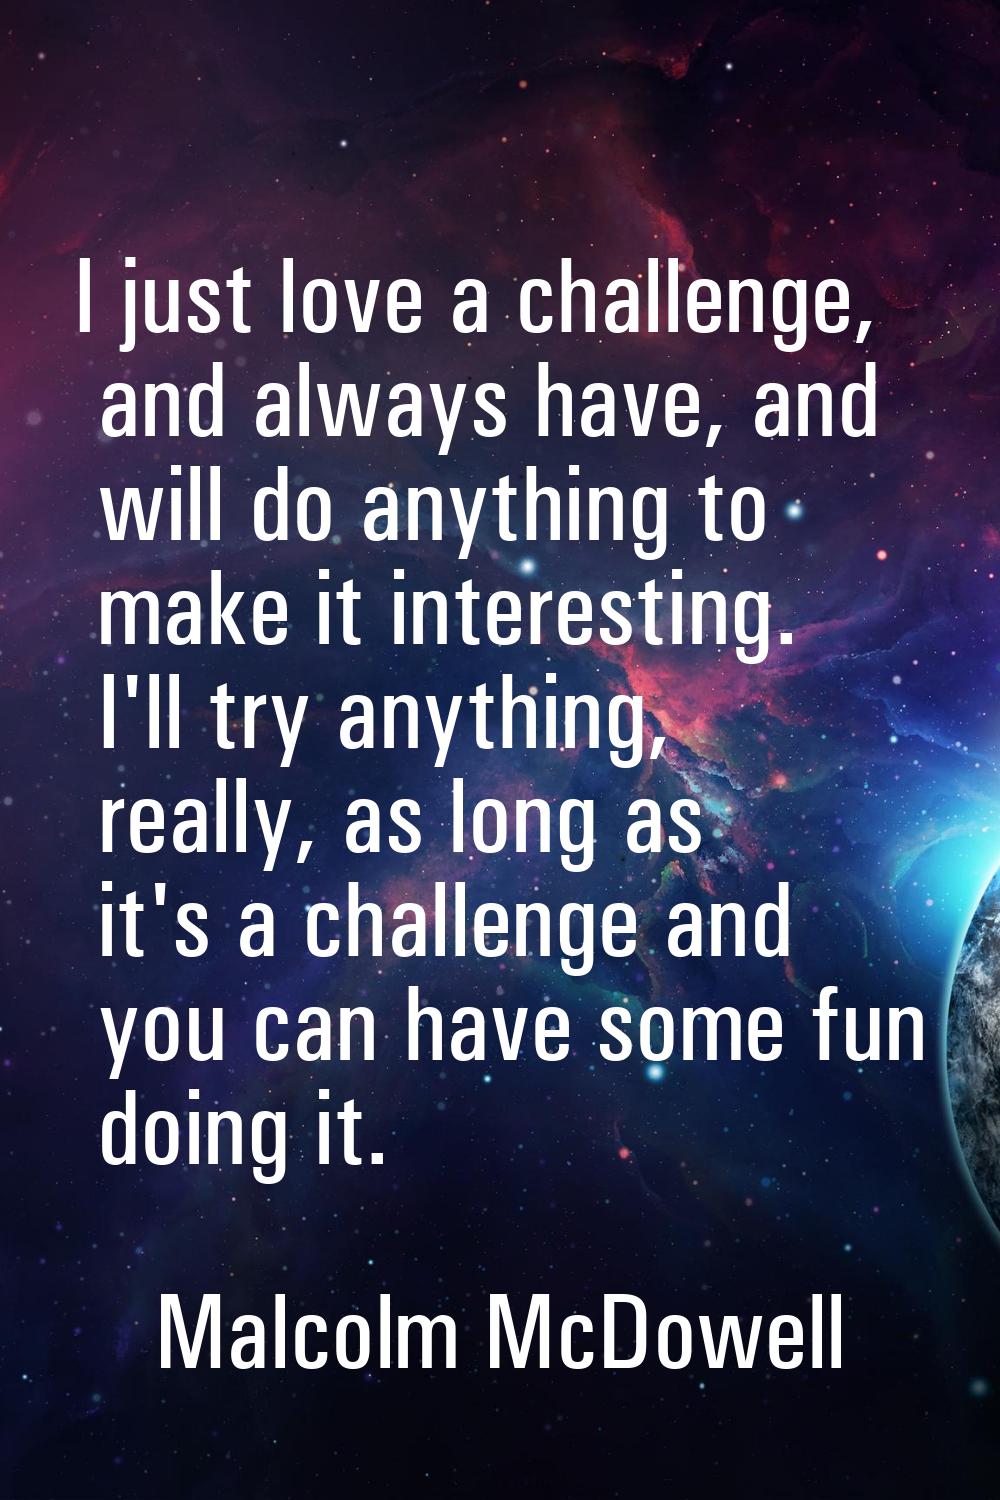 I just love a challenge, and always have, and will do anything to make it interesting. I'll try any